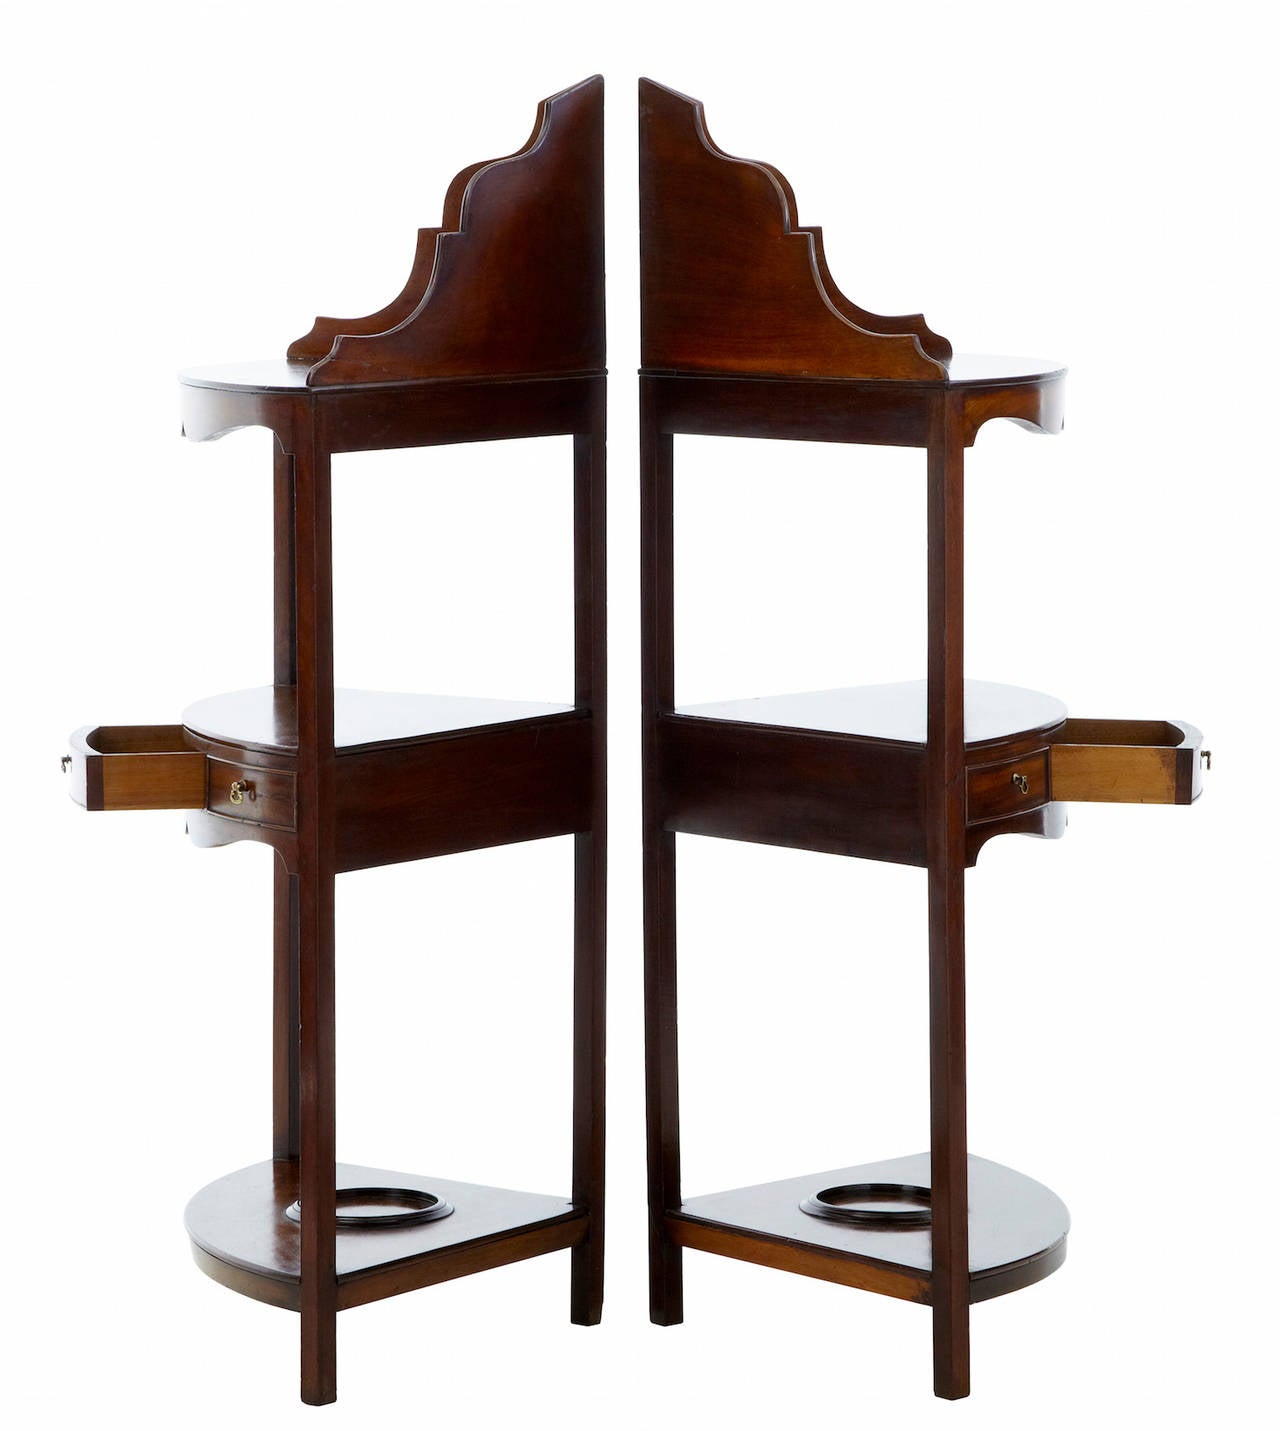 Pair of late Victorian mahogany corner washstands, circa 1890.
Gallery top comprising of three tiers, second tier with one drawer and two dummies, bottom tier with bowl cradle.
Minor repairs to gallery top.

Measures: Height 42